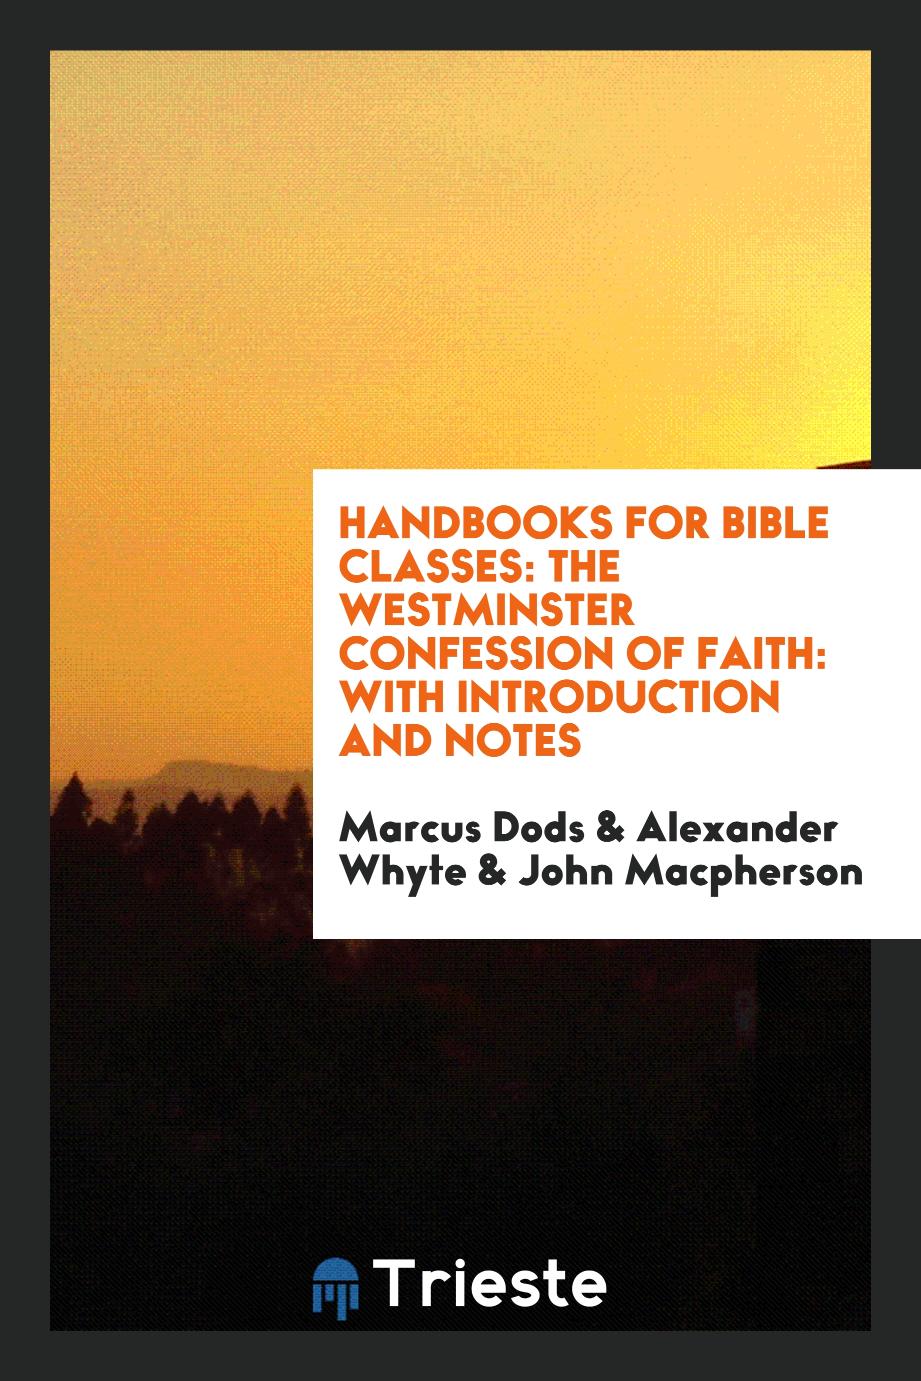 Handbooks for bible classes: The Westminster confession of faith: with introduction and notes